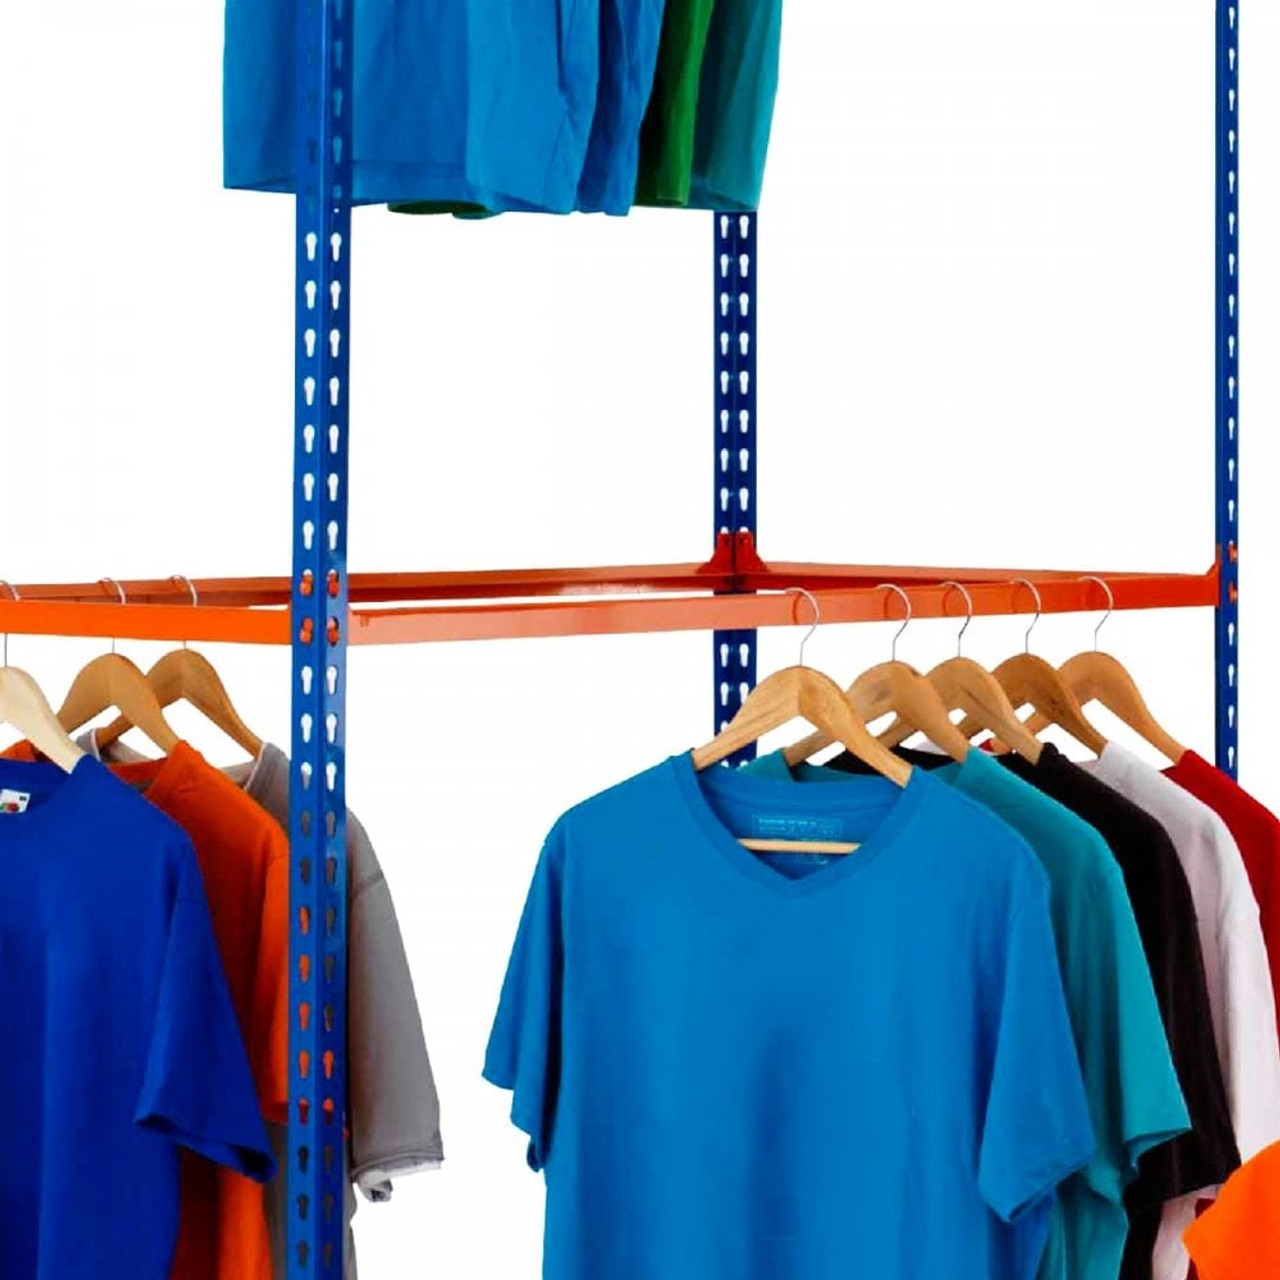 Stockroom Garment Racking Units - Up To 30kg UDL/Tier - Choice of ...